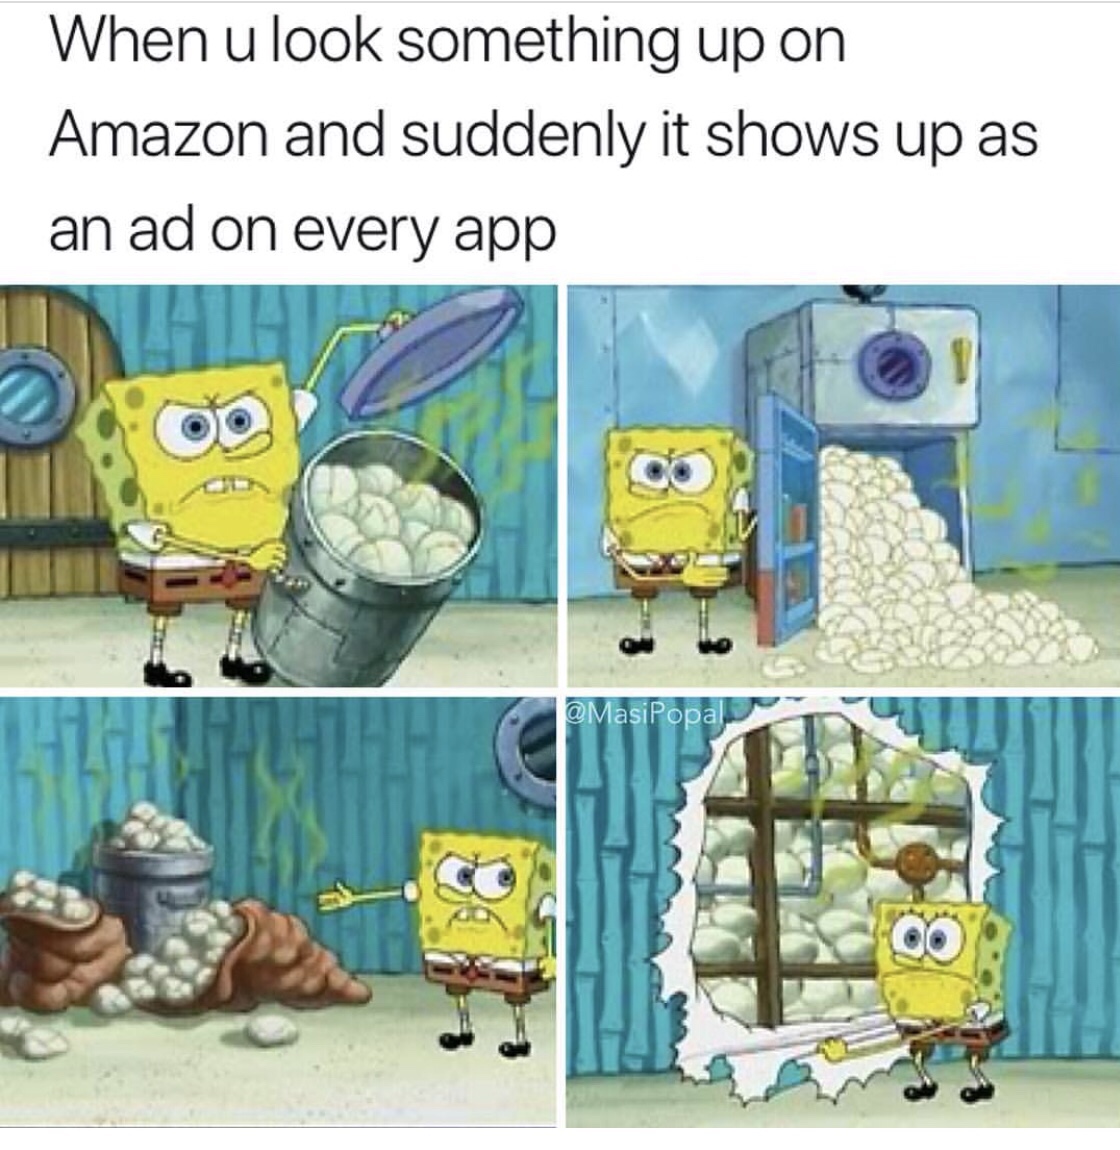 spongebob diapers meme - When u look something up on Amazon and suddenly it shows up as an ad on every app